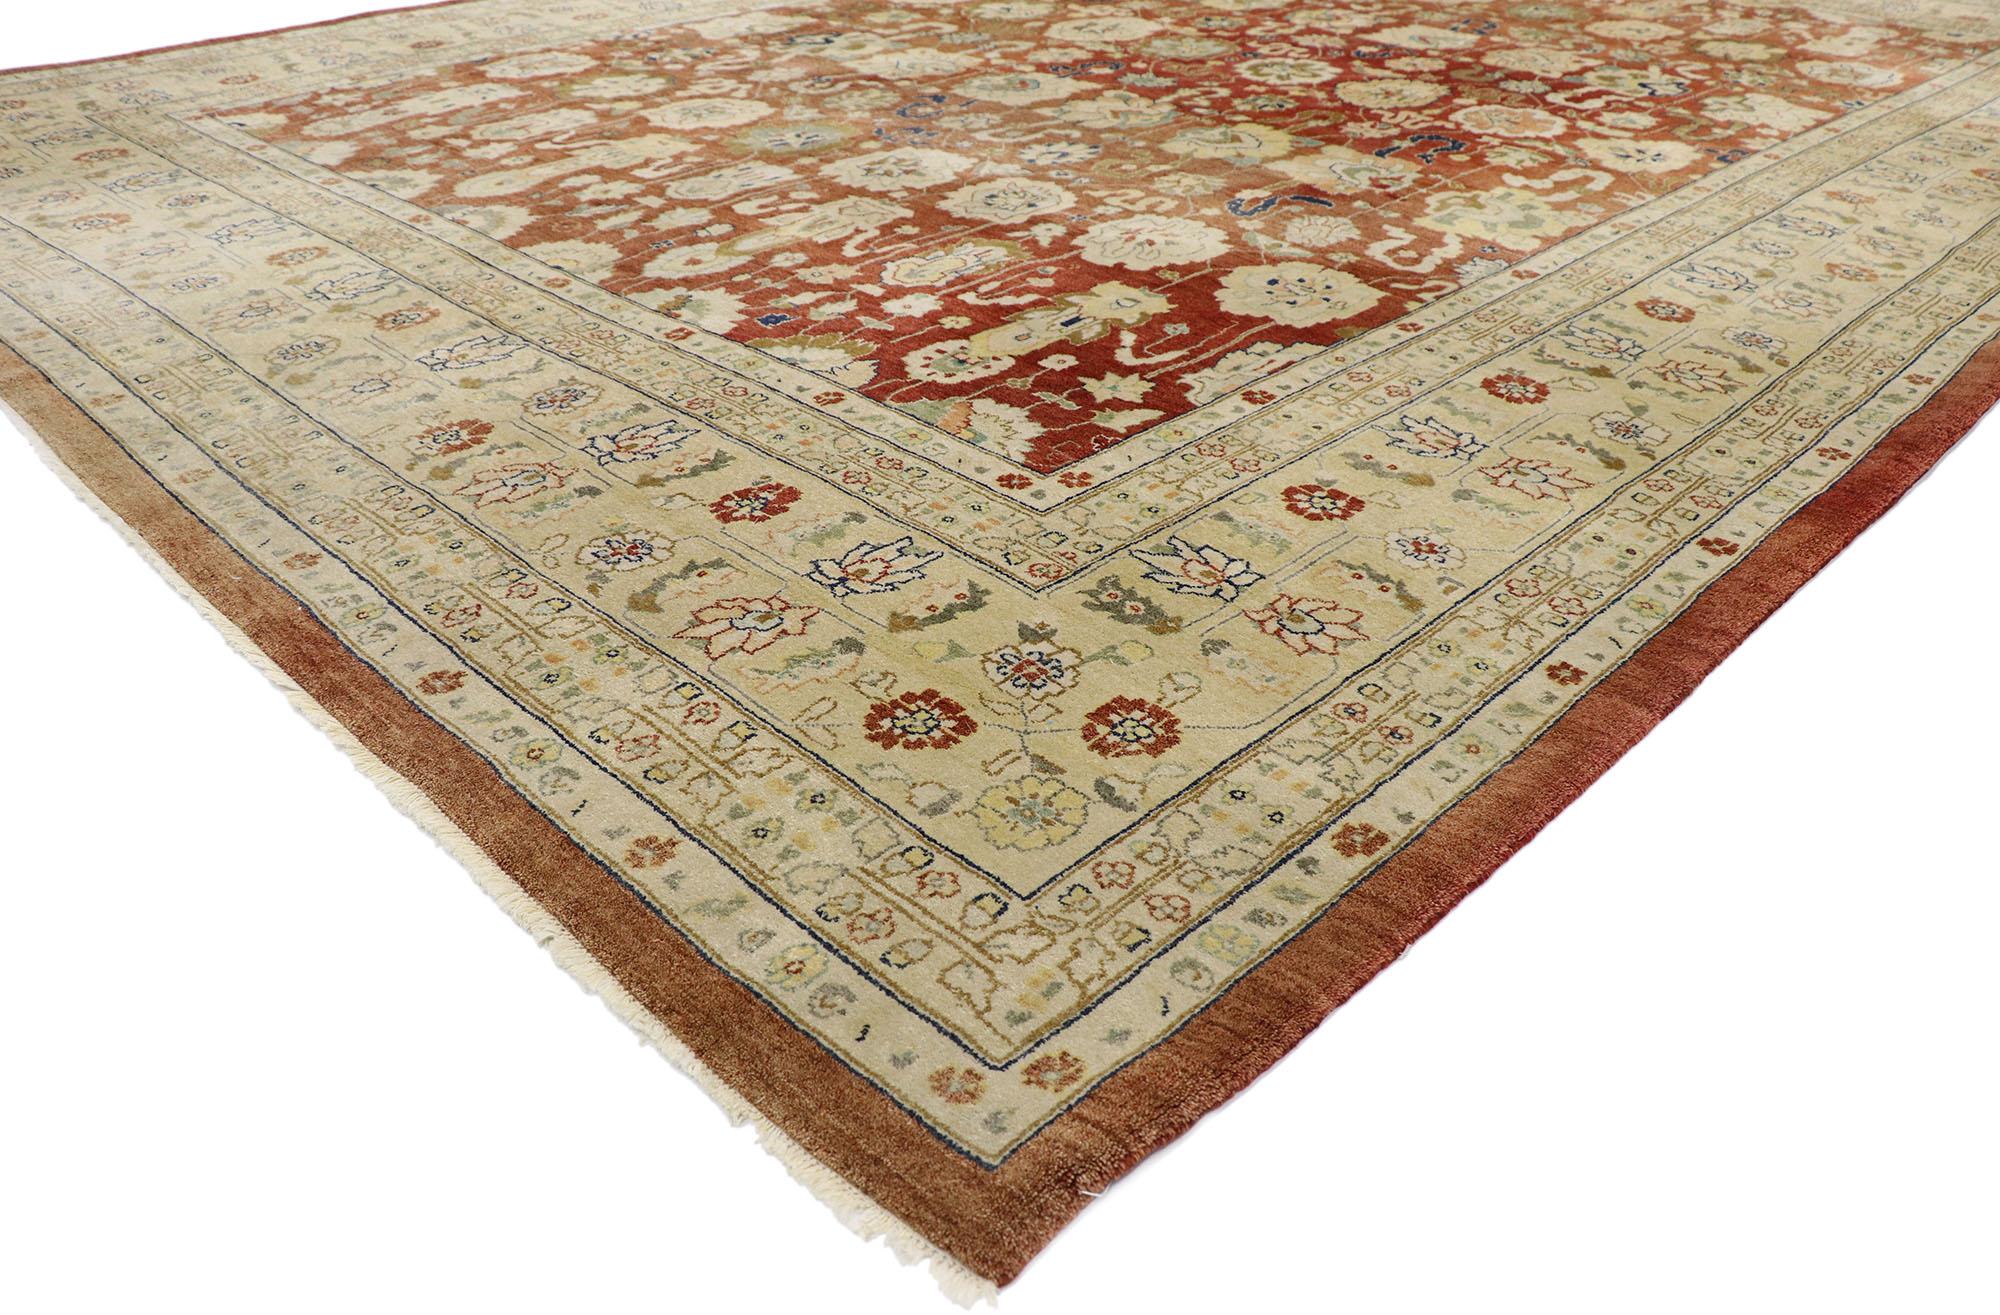 77577 vintage Pakistani rug with Rustic Arts & Crafts style. With its timeless design and warm earth-tone colors, this hand-knotted wool vintage Pakistani rug astounds with its beauty. The abrashed field is covered in an all-over botanical pattern